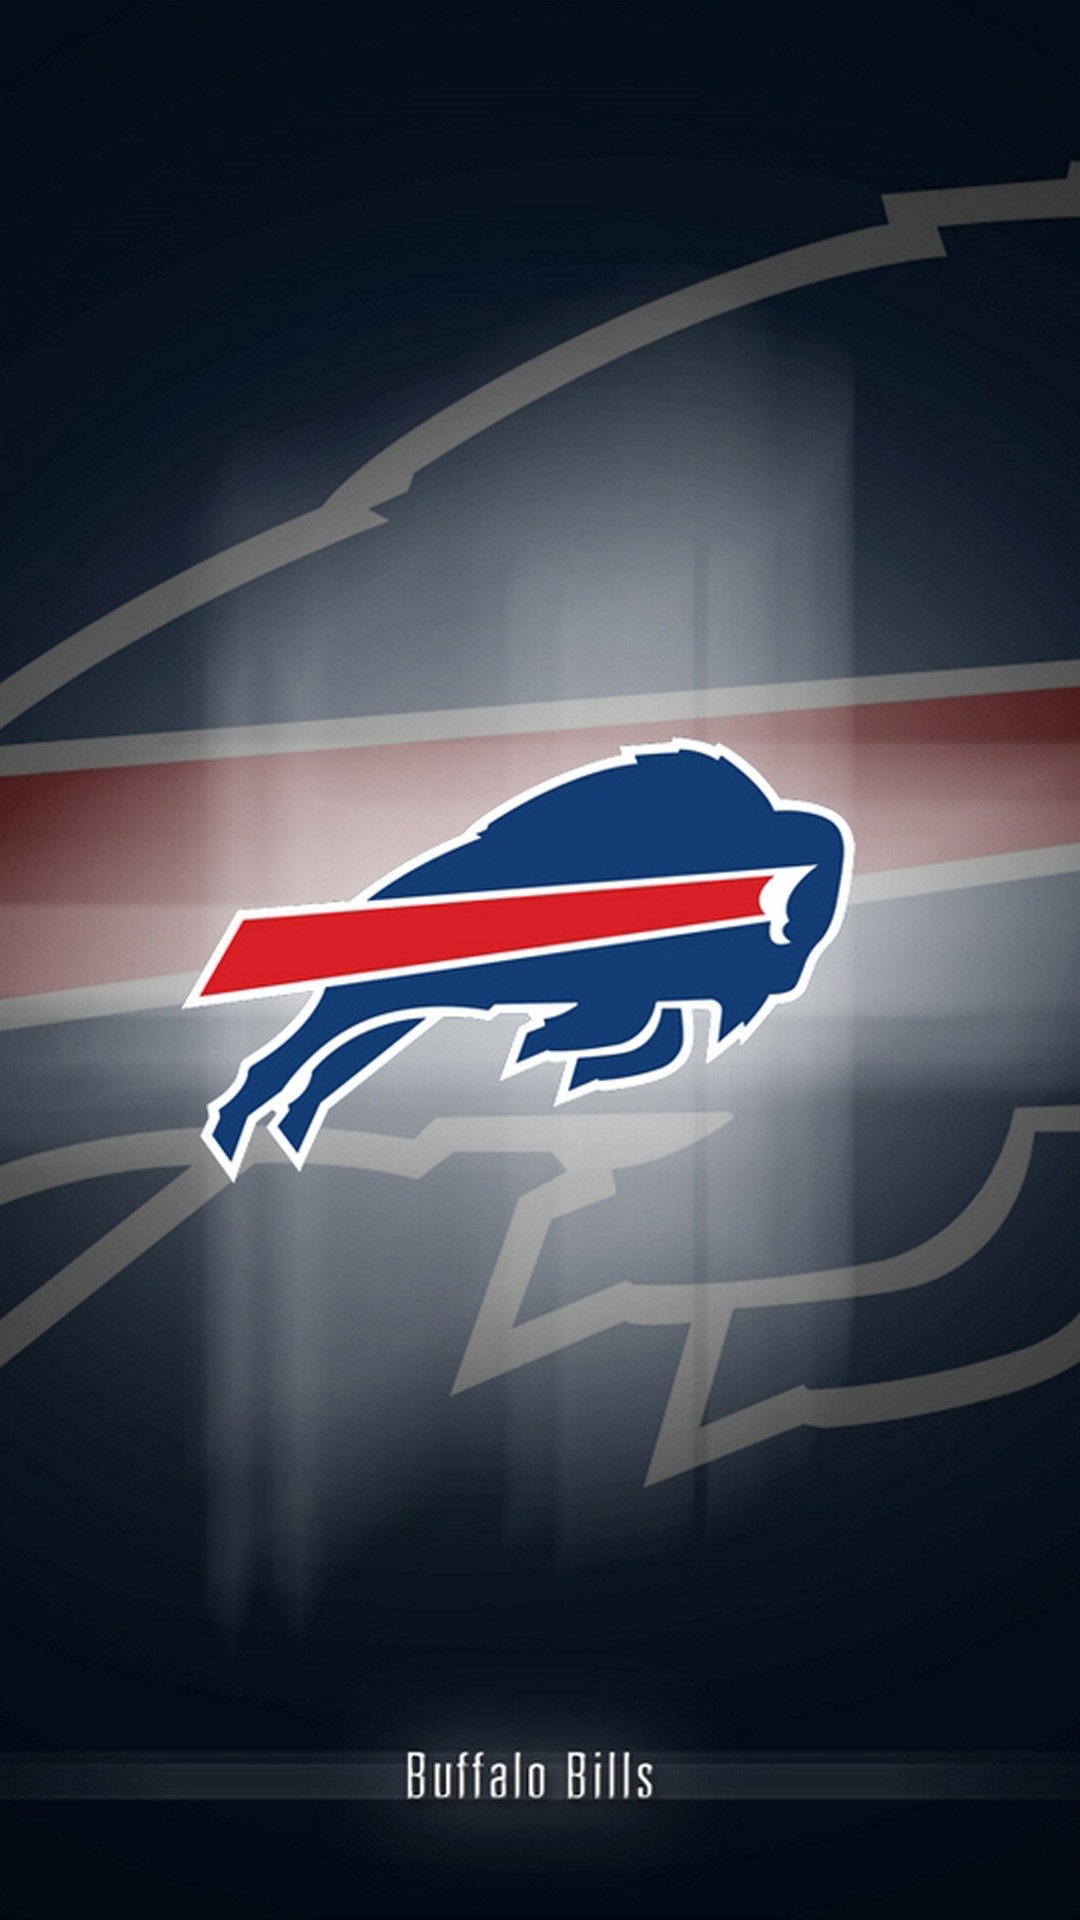 Buffalo Bills iPhone X Wallpaper With high-resolution 1080X1920 pixel. Download and set as wallpaper for Apple iPhone X, XS Max, XR, 8, 7, 6, SE, iPad, Android